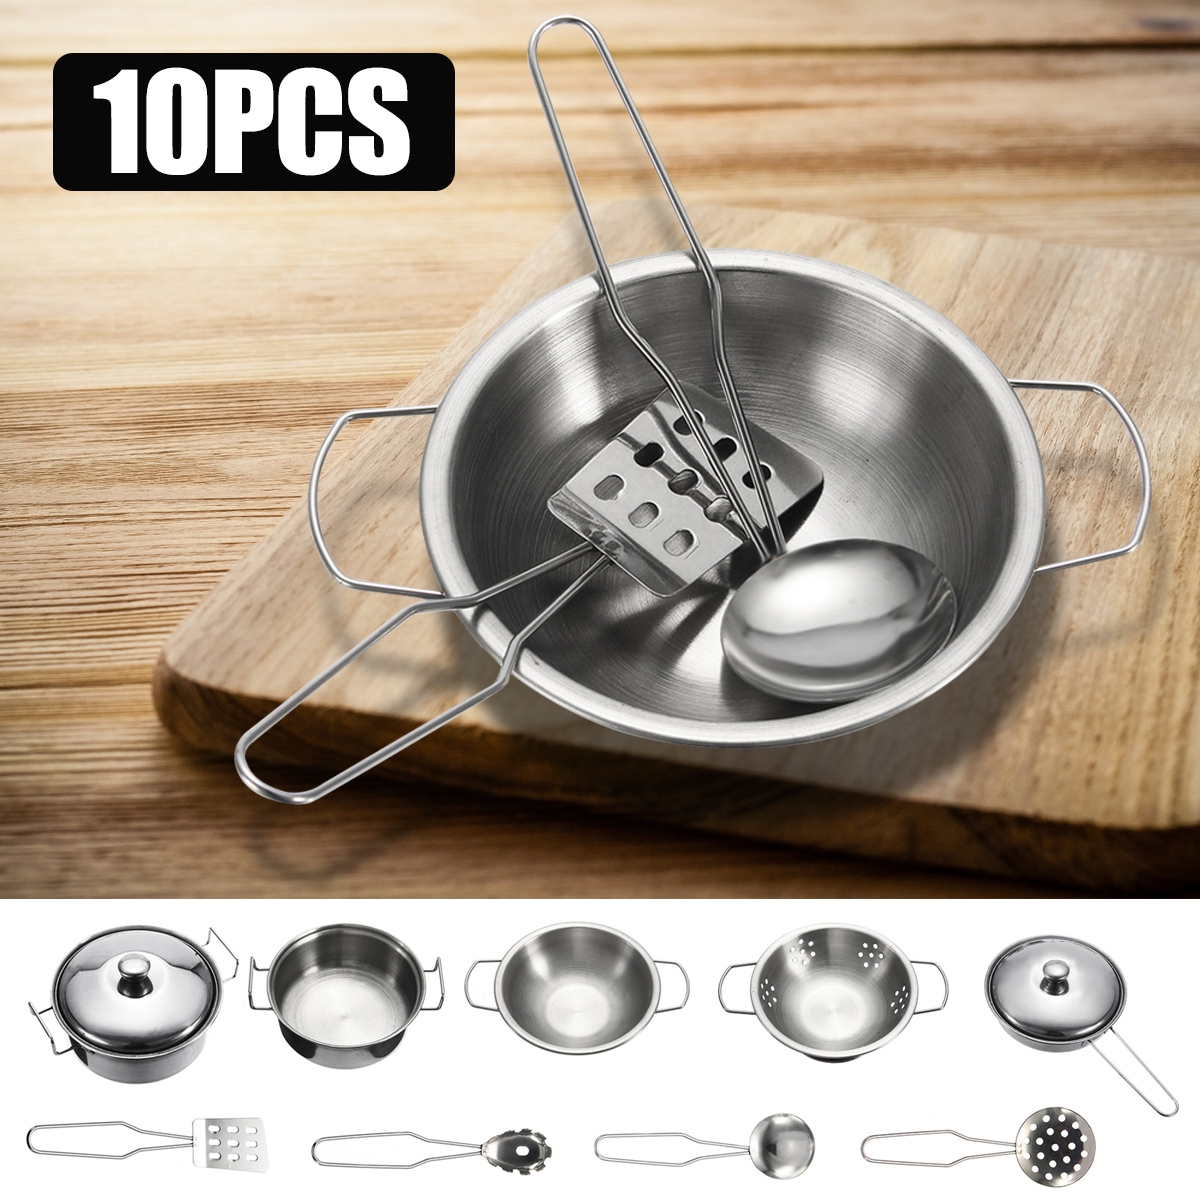 10pc-Stainless-steel-Cookware-Kitchen-Cooking-Set-Pot-Pans-House-Play-Toy-For-Children-1418086-1